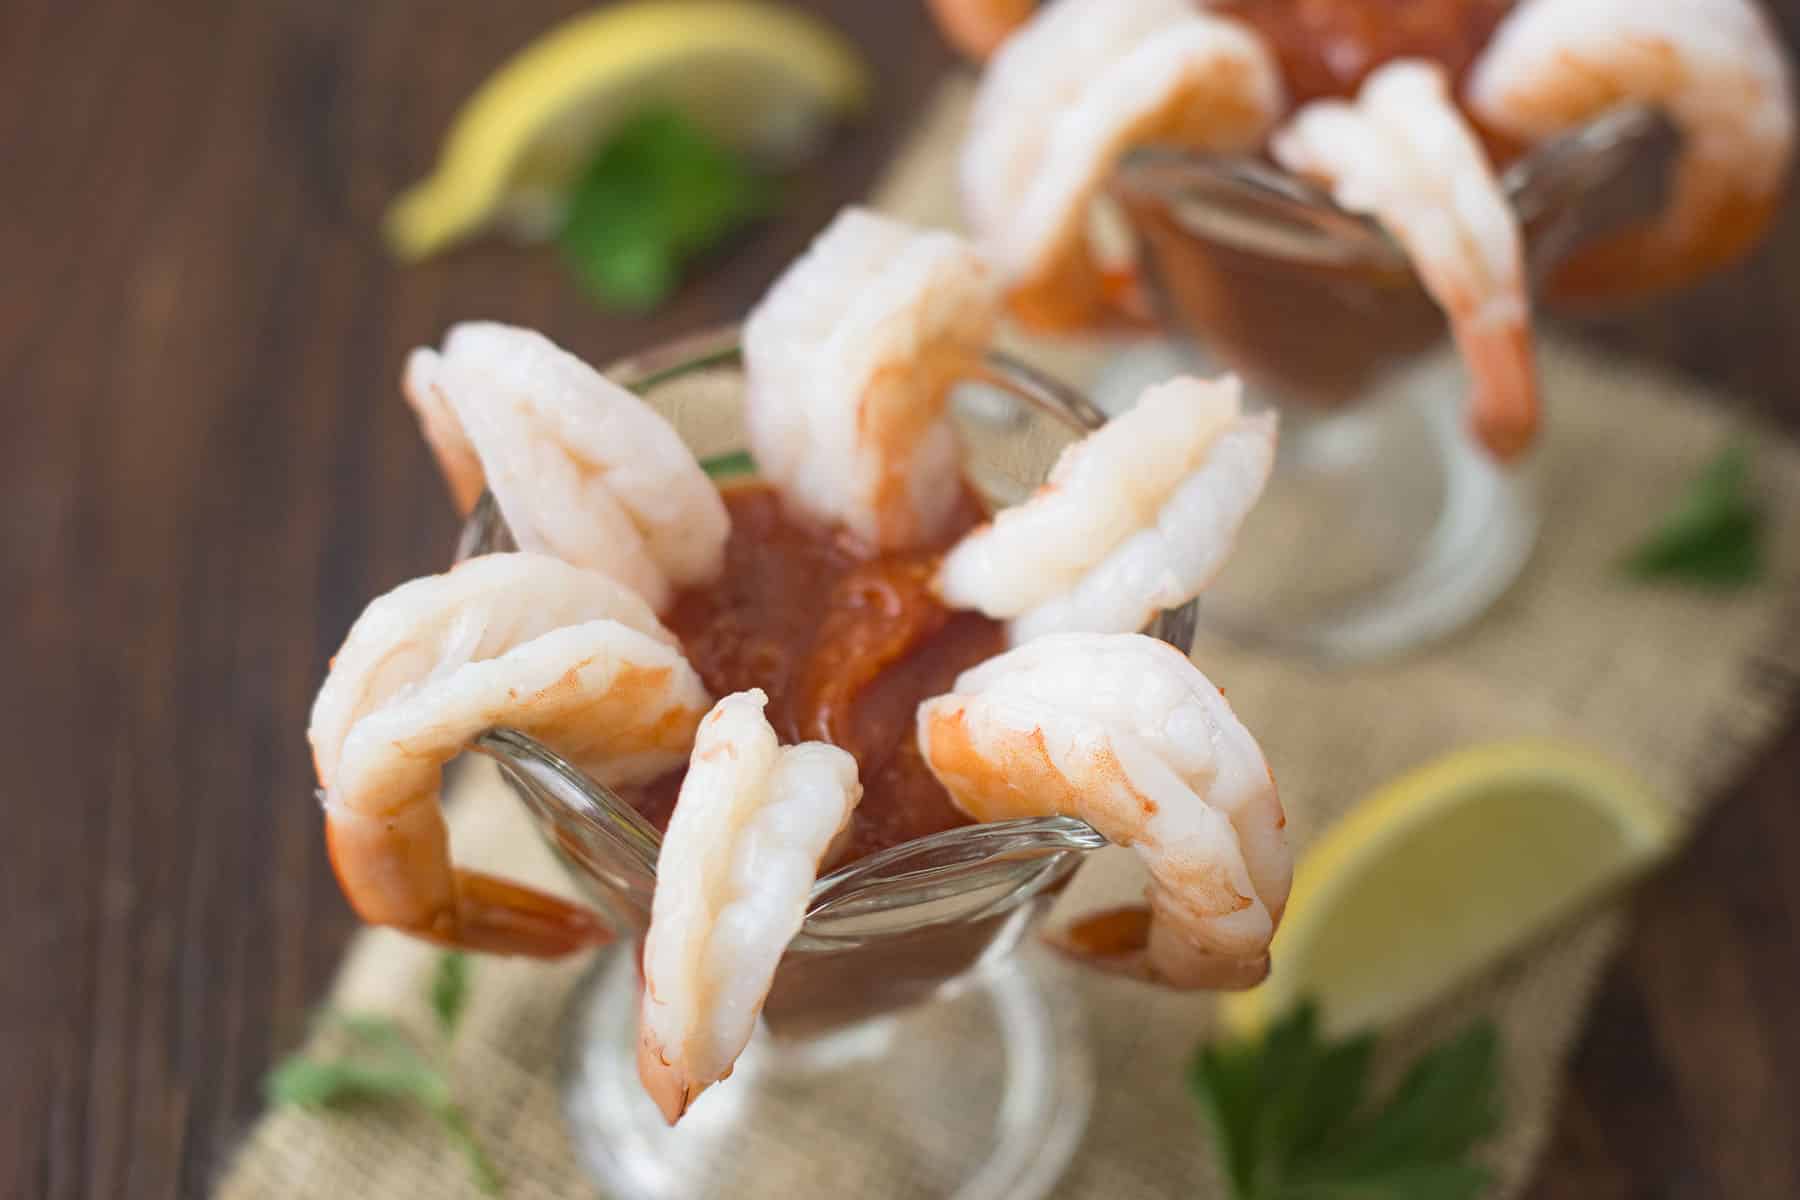 6 shrimp hanging off of a glass with cocktail sauce in the glass.